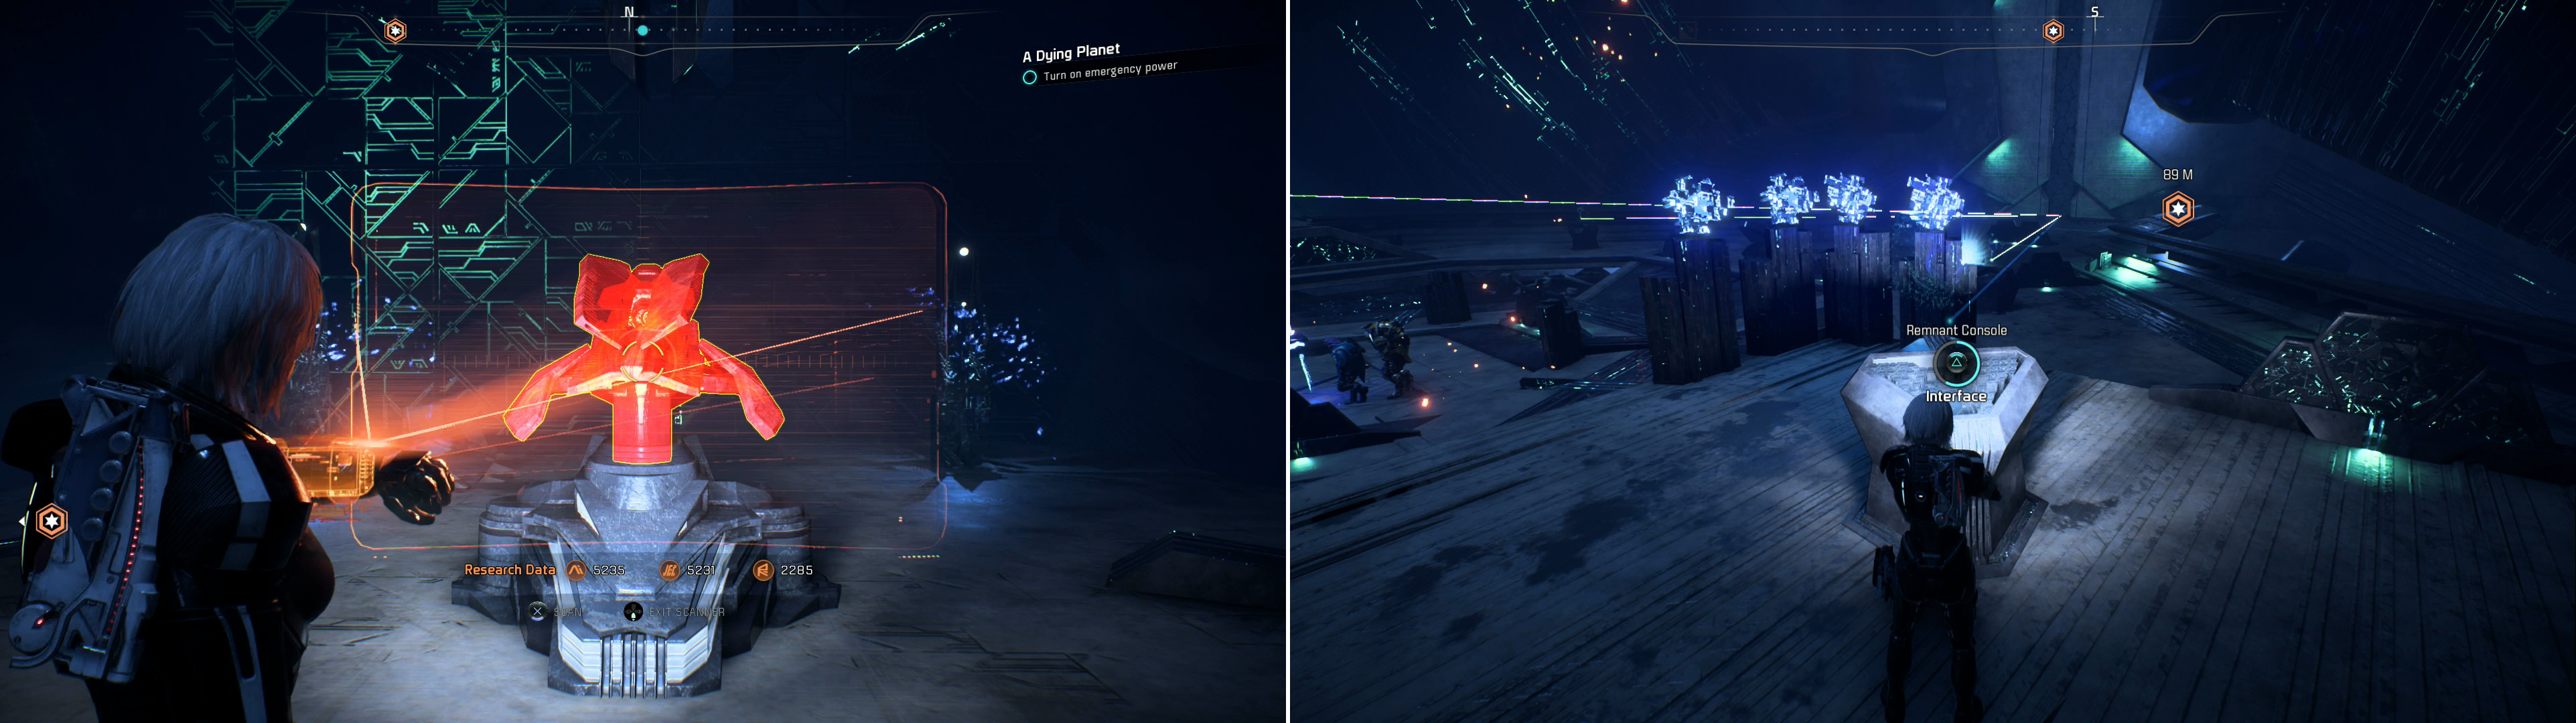 Consider destroying a dormant Remnant Turret before it can cause you trouble (left). Activate several Remnant Consoles in order of the numer of lights near them (right).